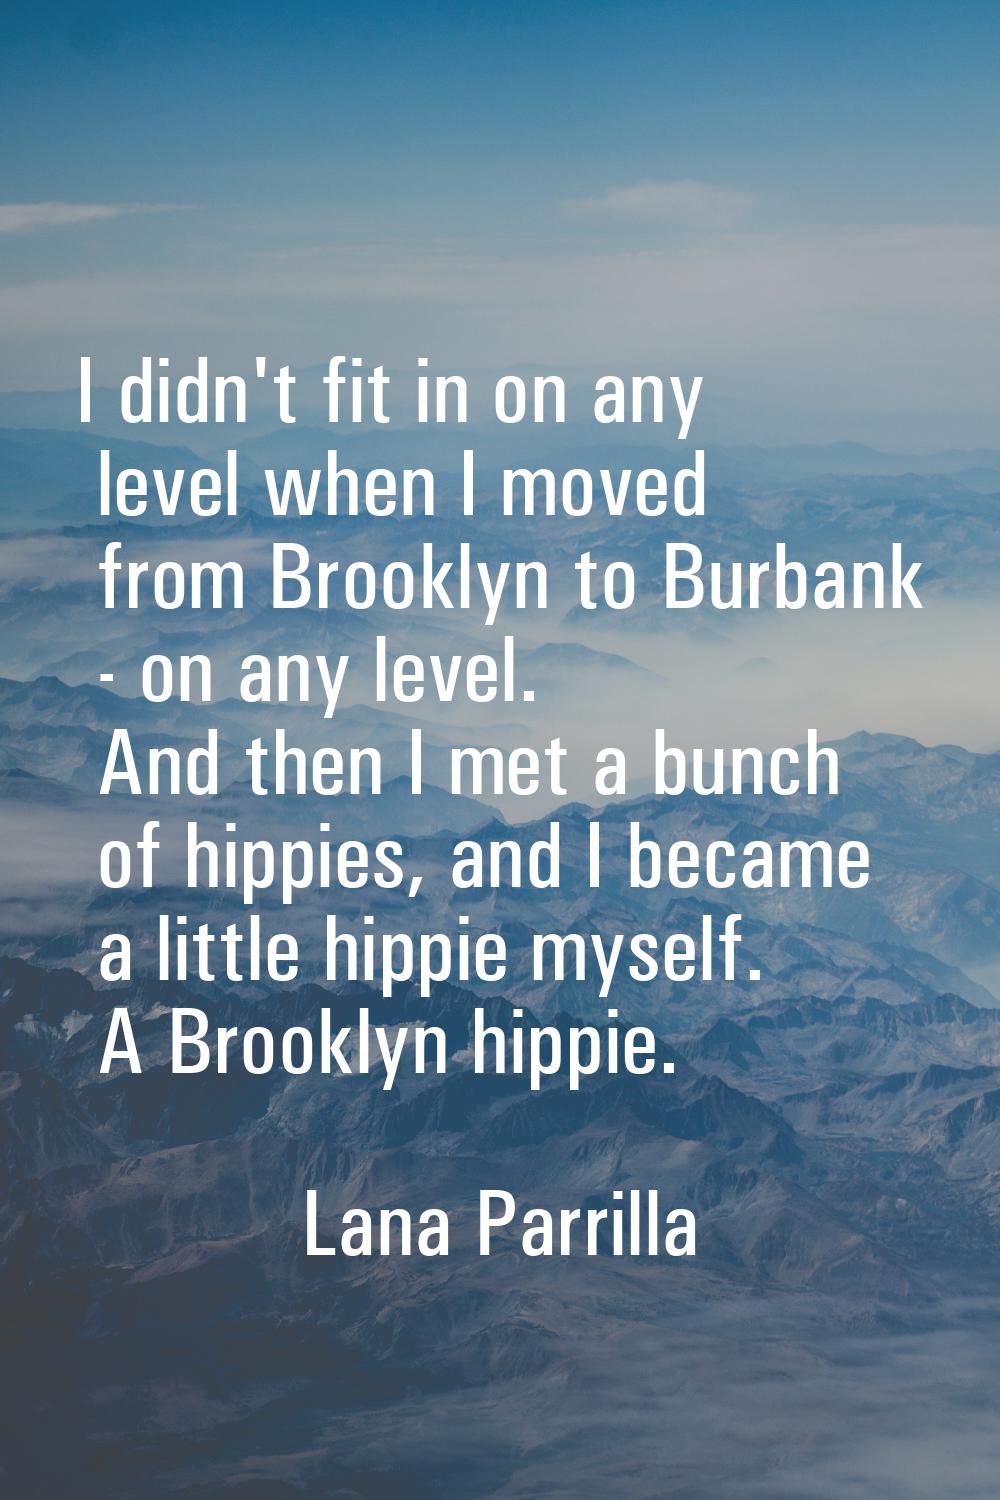 I didn't fit in on any level when I moved from Brooklyn to Burbank - on any level. And then I met a